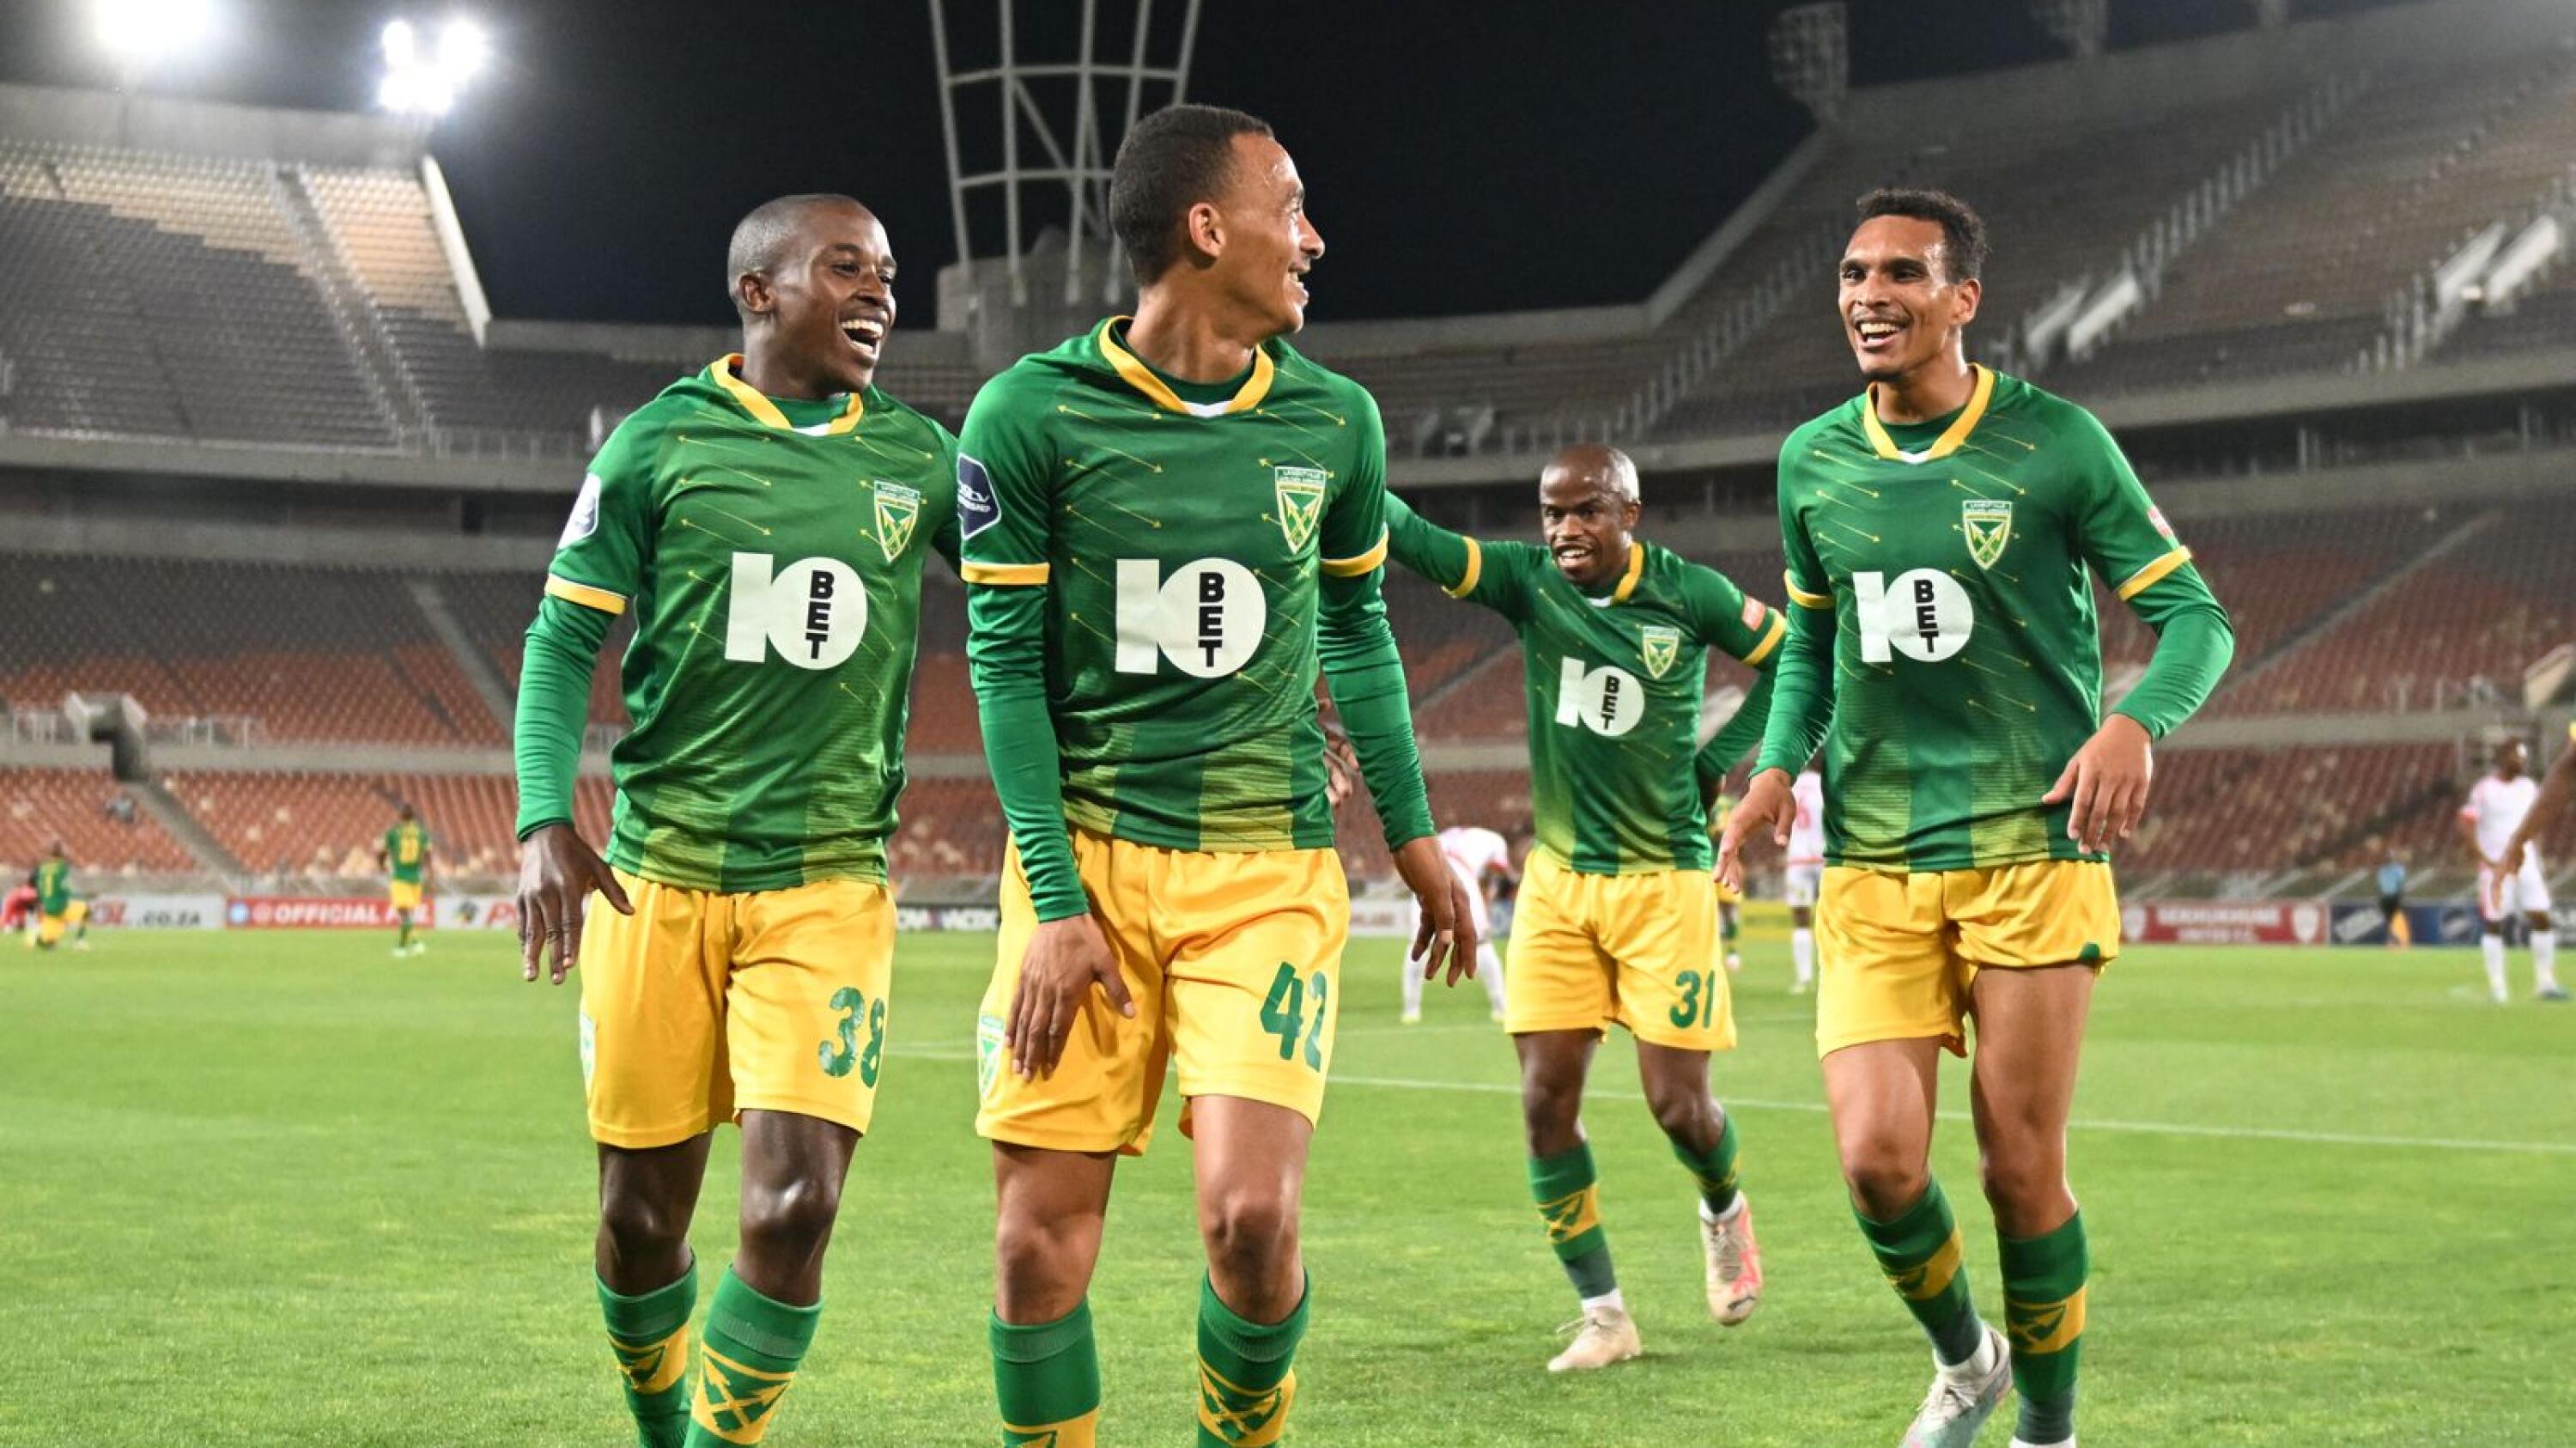 Golden Arrows’ Brandon Theron celebrates with teammates after scoring a goal during their DStv Premiership match against Sekhukhune United